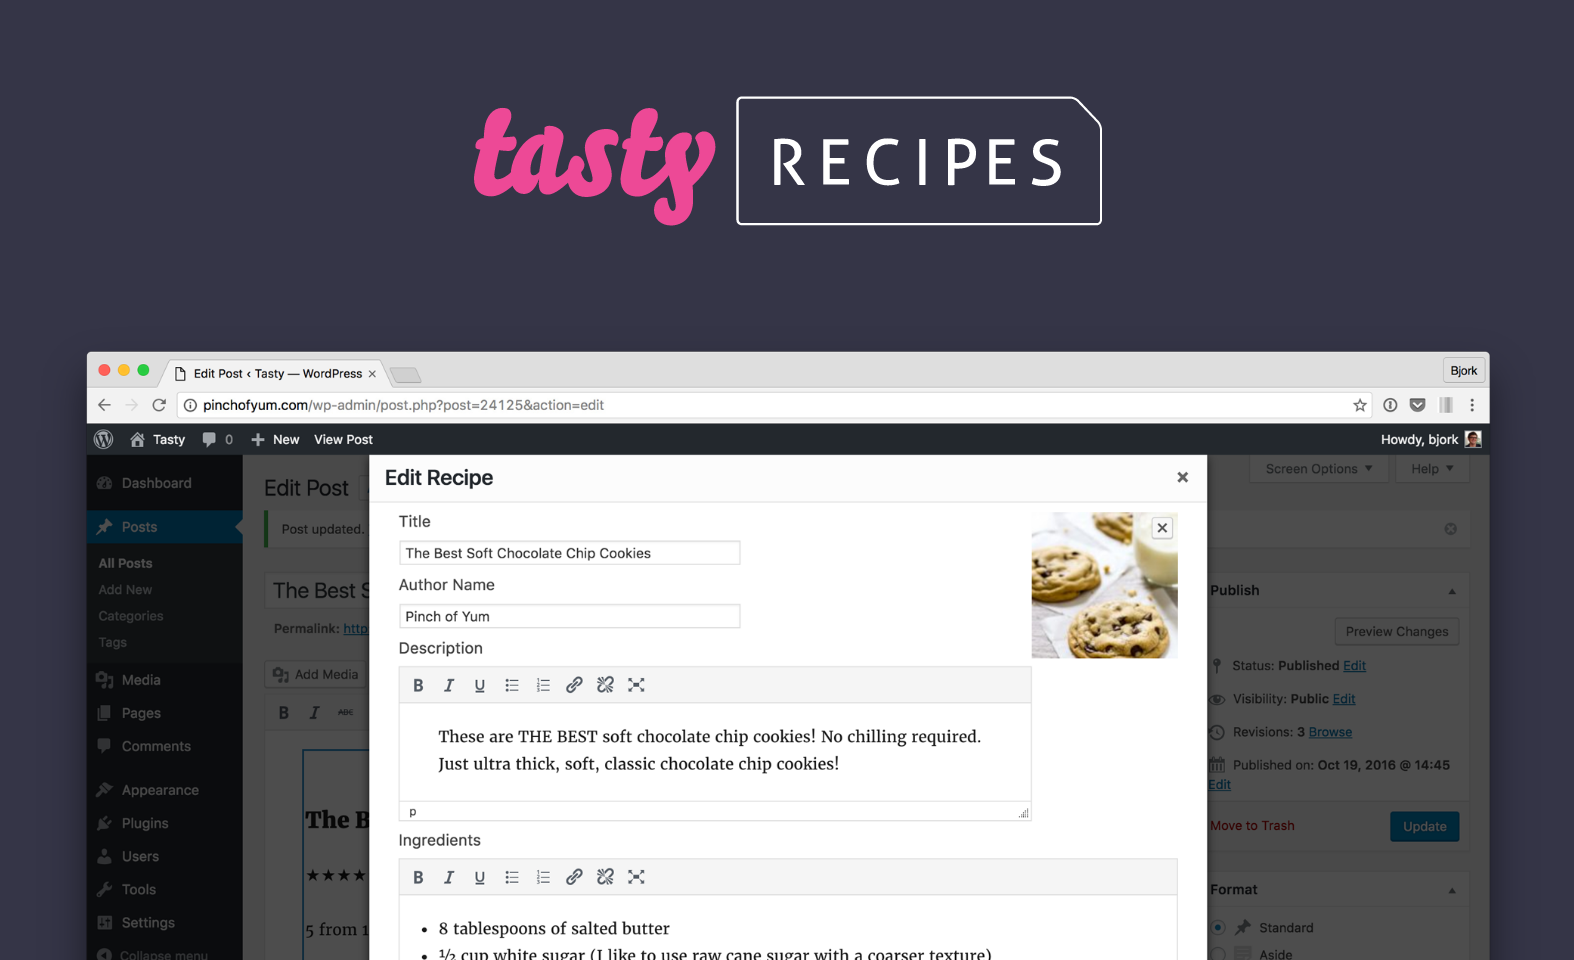 the Tasty Recipes logo and a screenshot of what Tasty Recipes does on WordPress